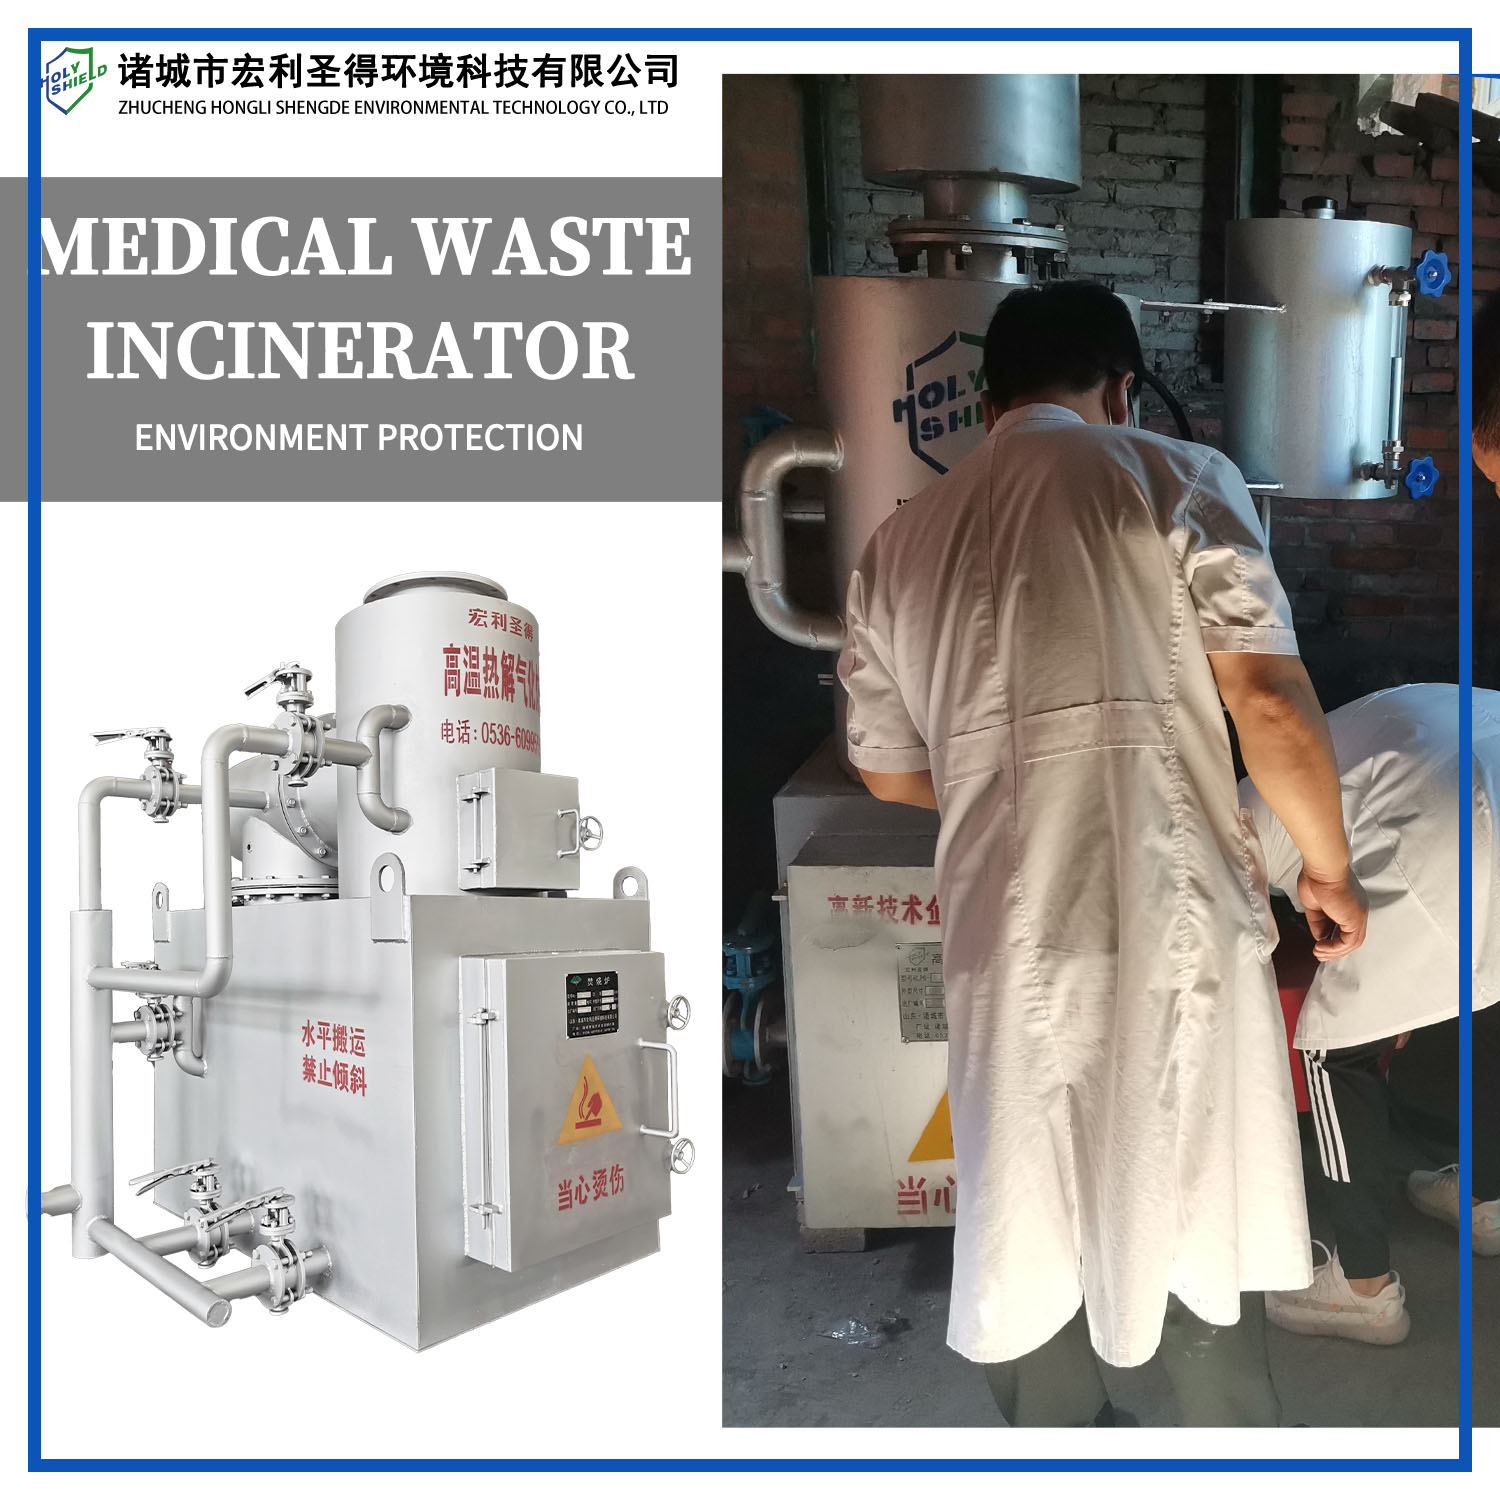 Holy Shield Medical waste incinerator helps Xinjiang fight the epidemic